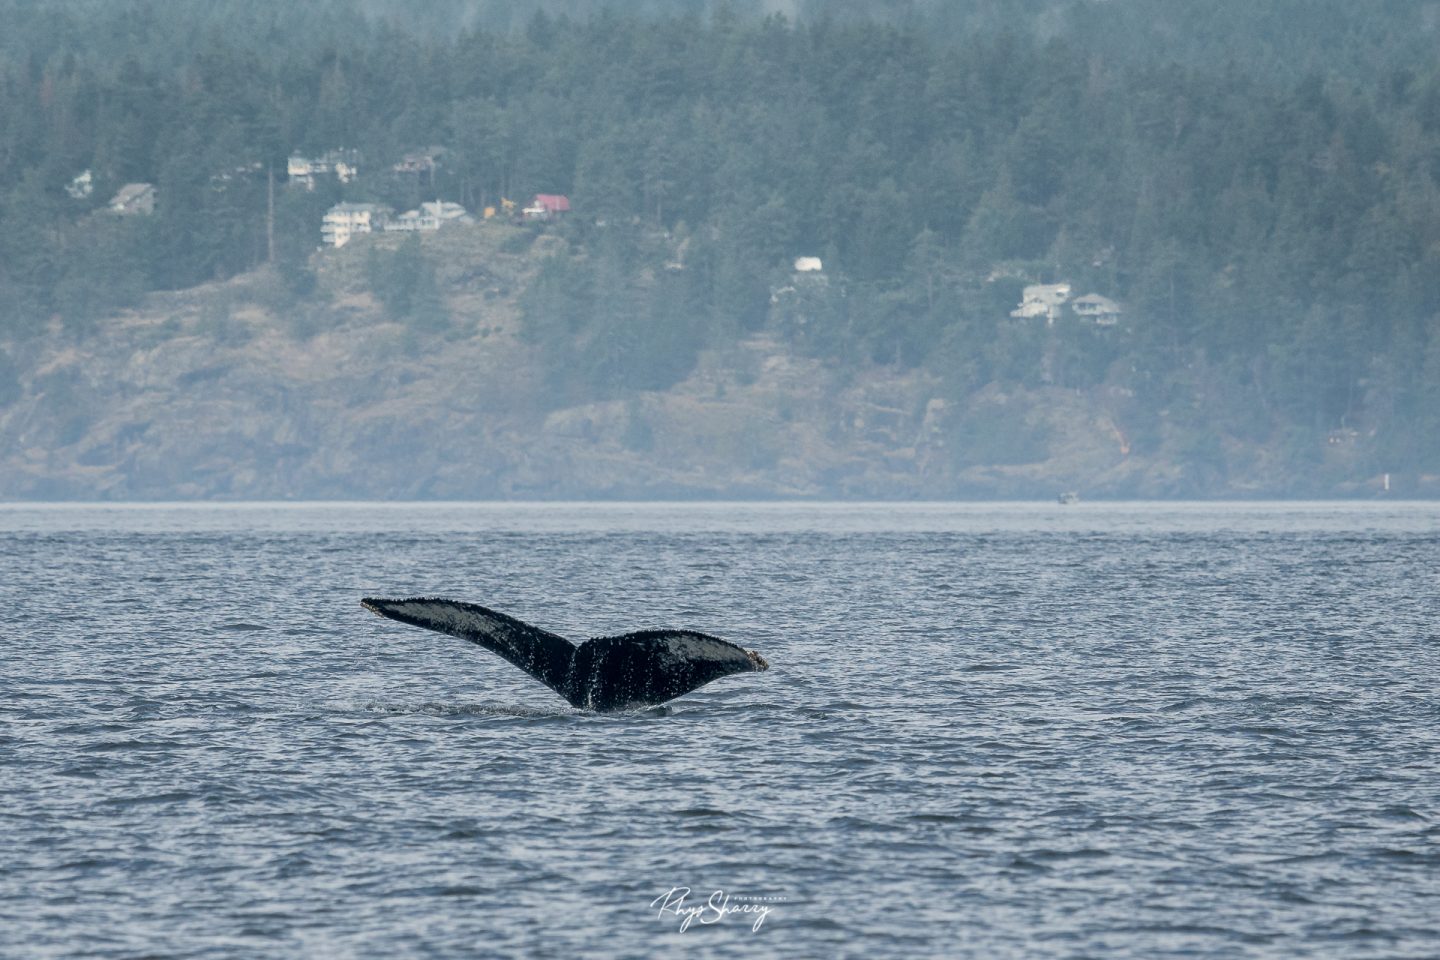 The tail of a humpback whale near Vancouver, BC